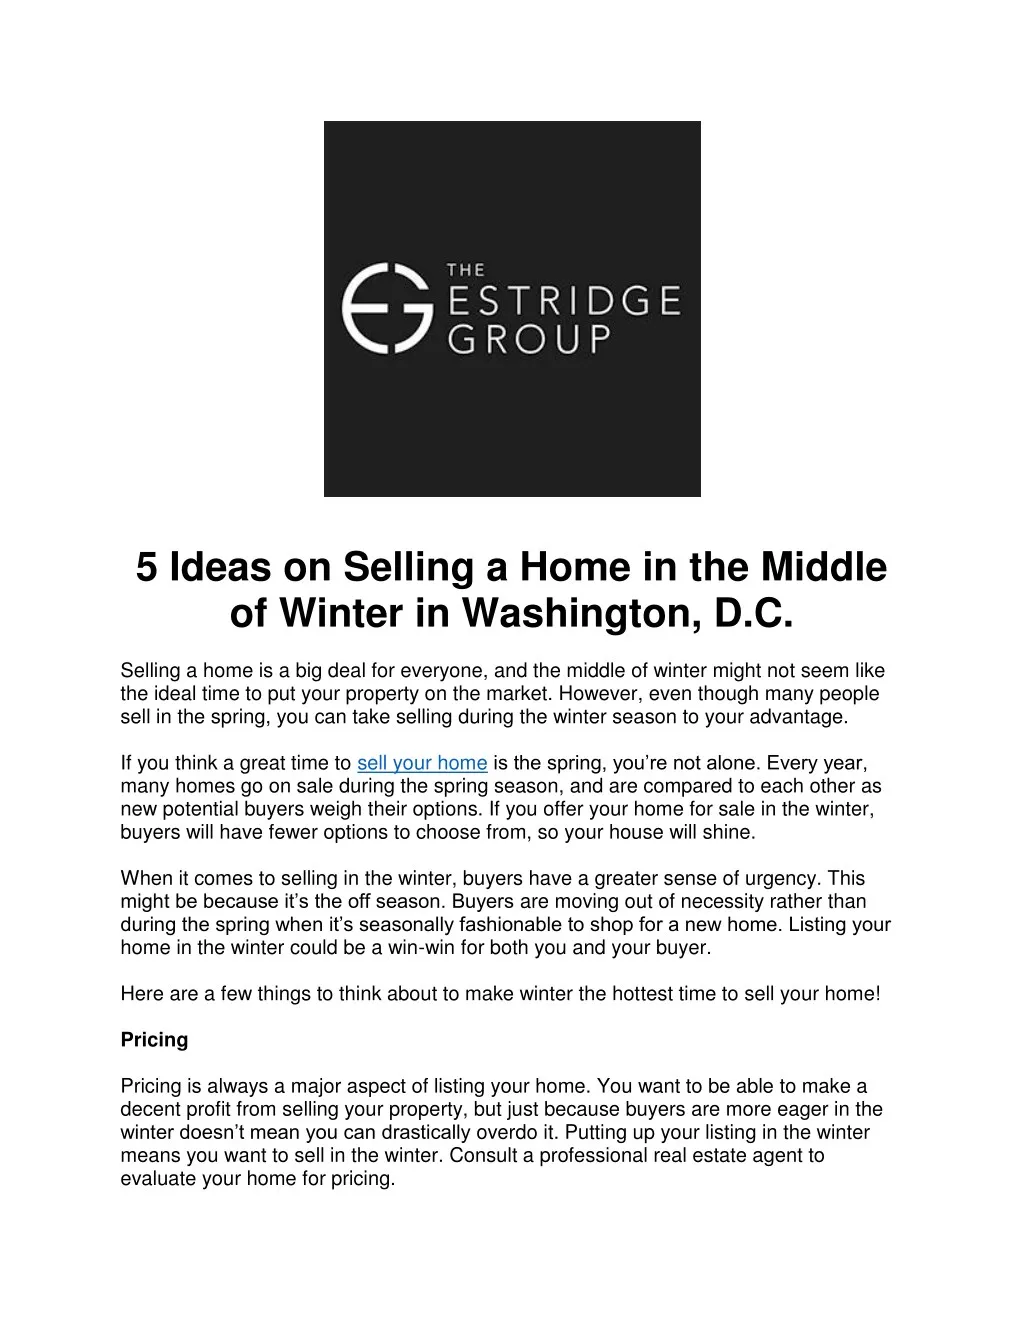 5 ideas on selling a home in the middle of winter